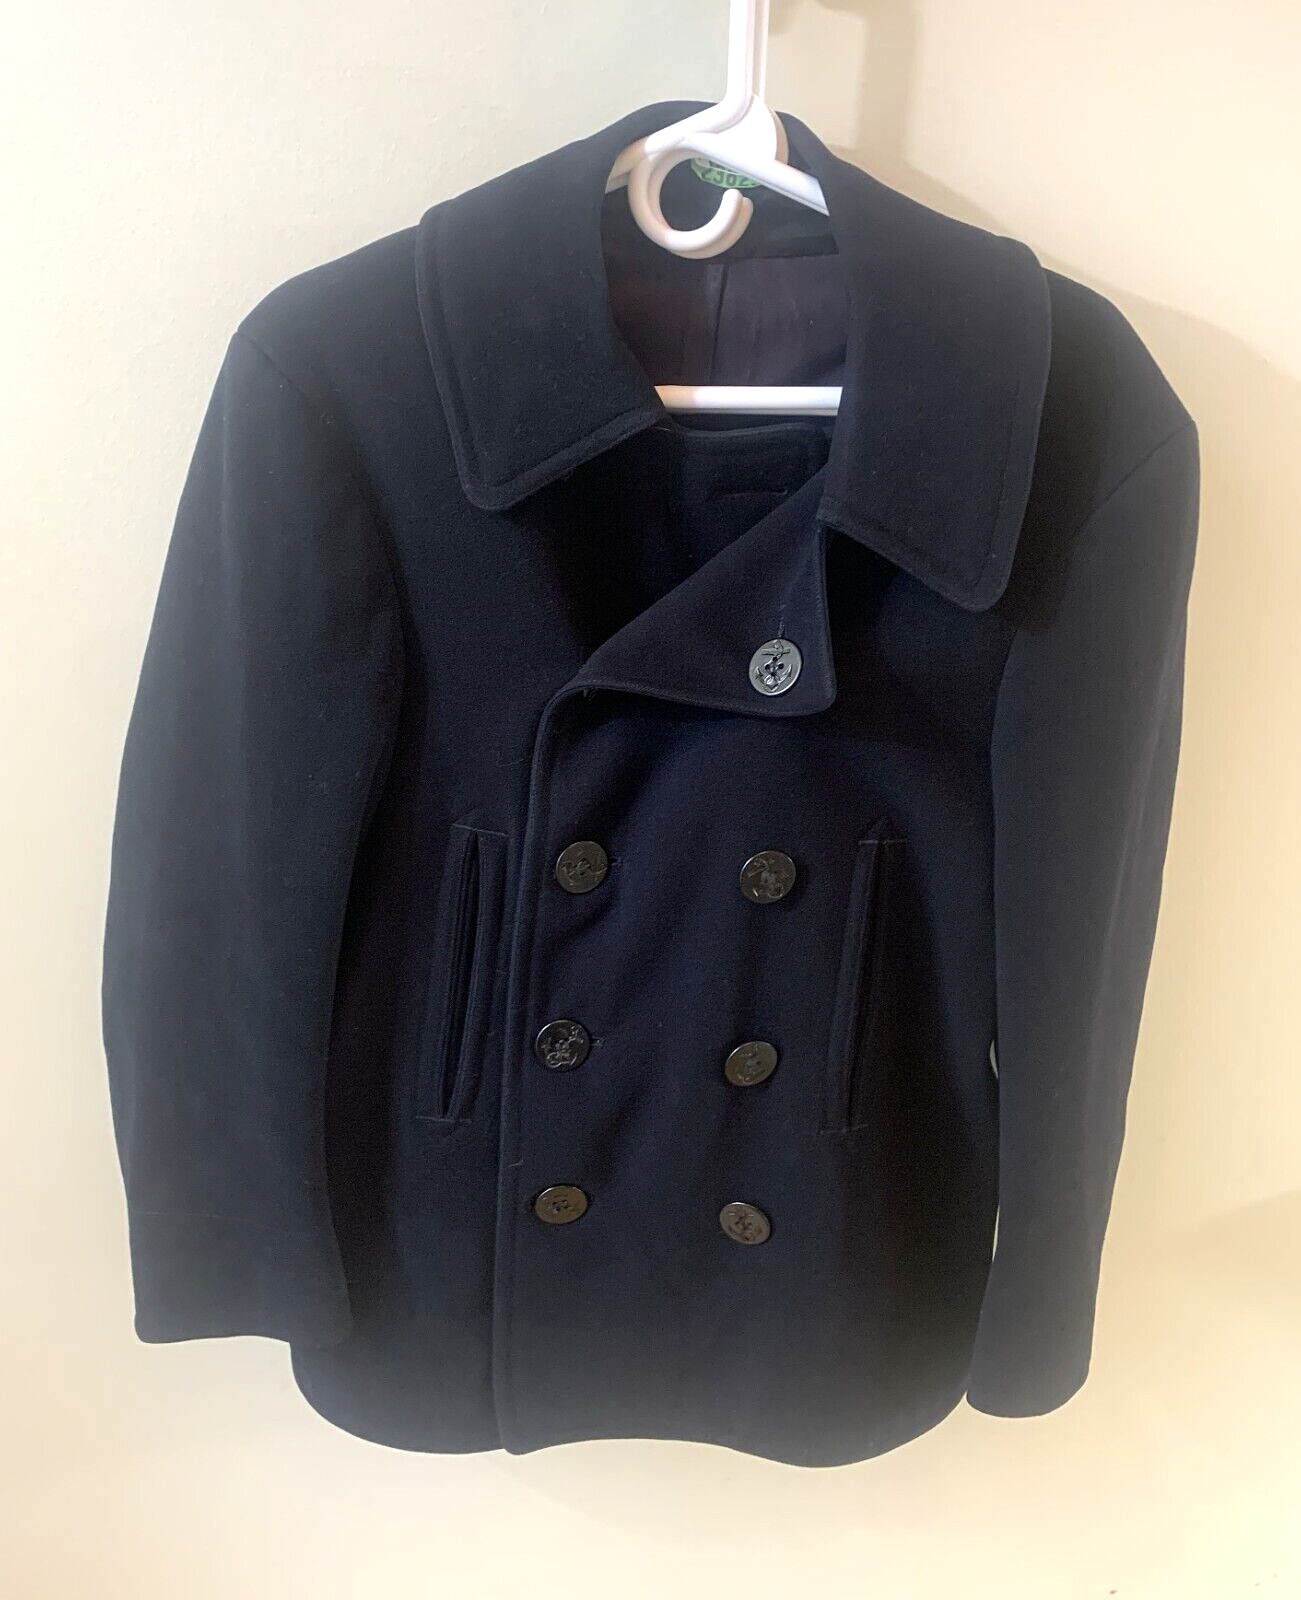 WWII 1940's Navy Peacoat Double Breasted Naval Wool Uniform Jacket